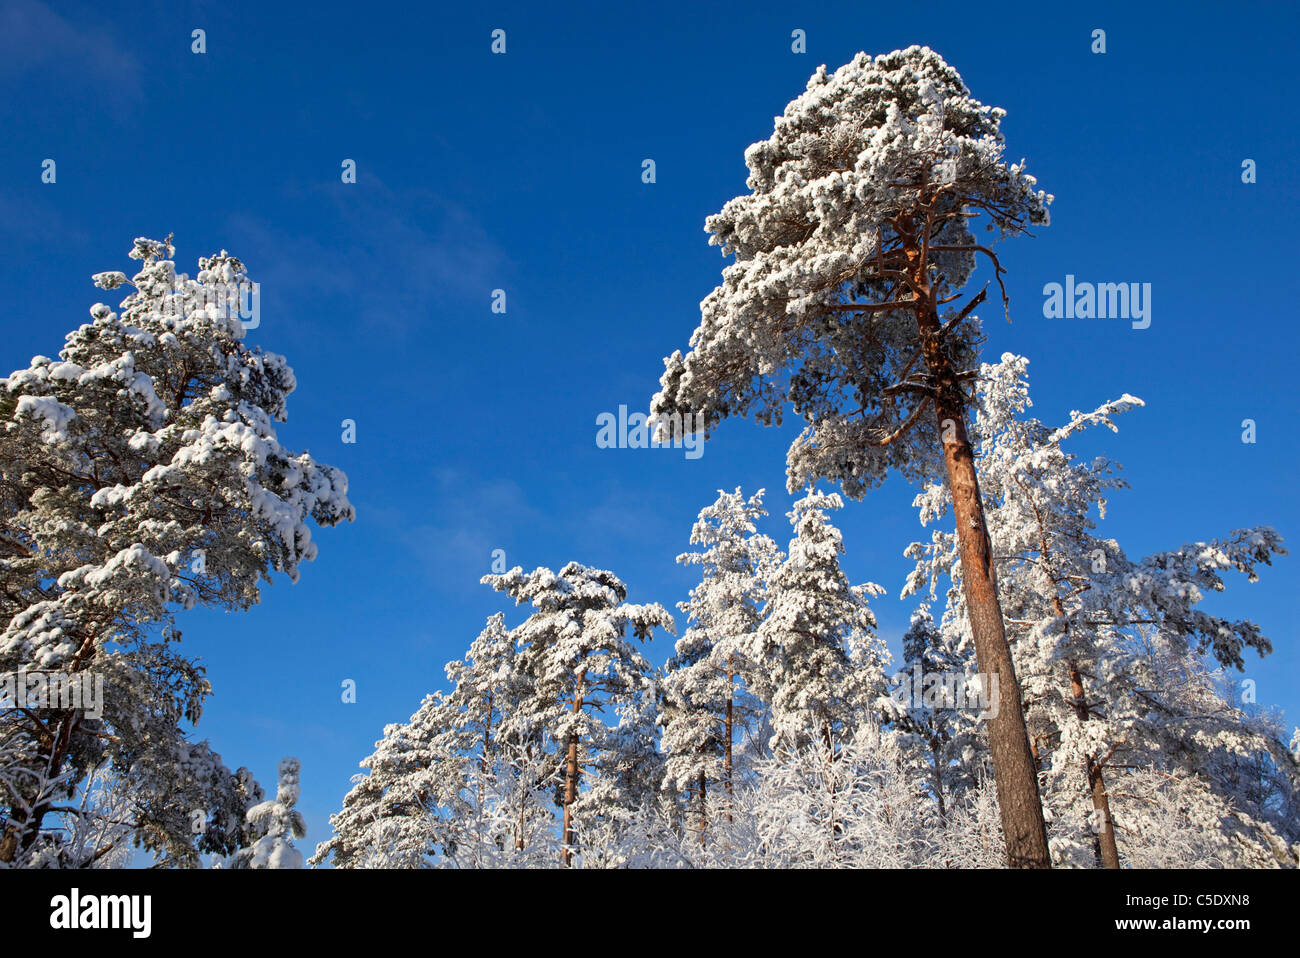 Low angle view of winter trees against clear blue sky Banque D'Images